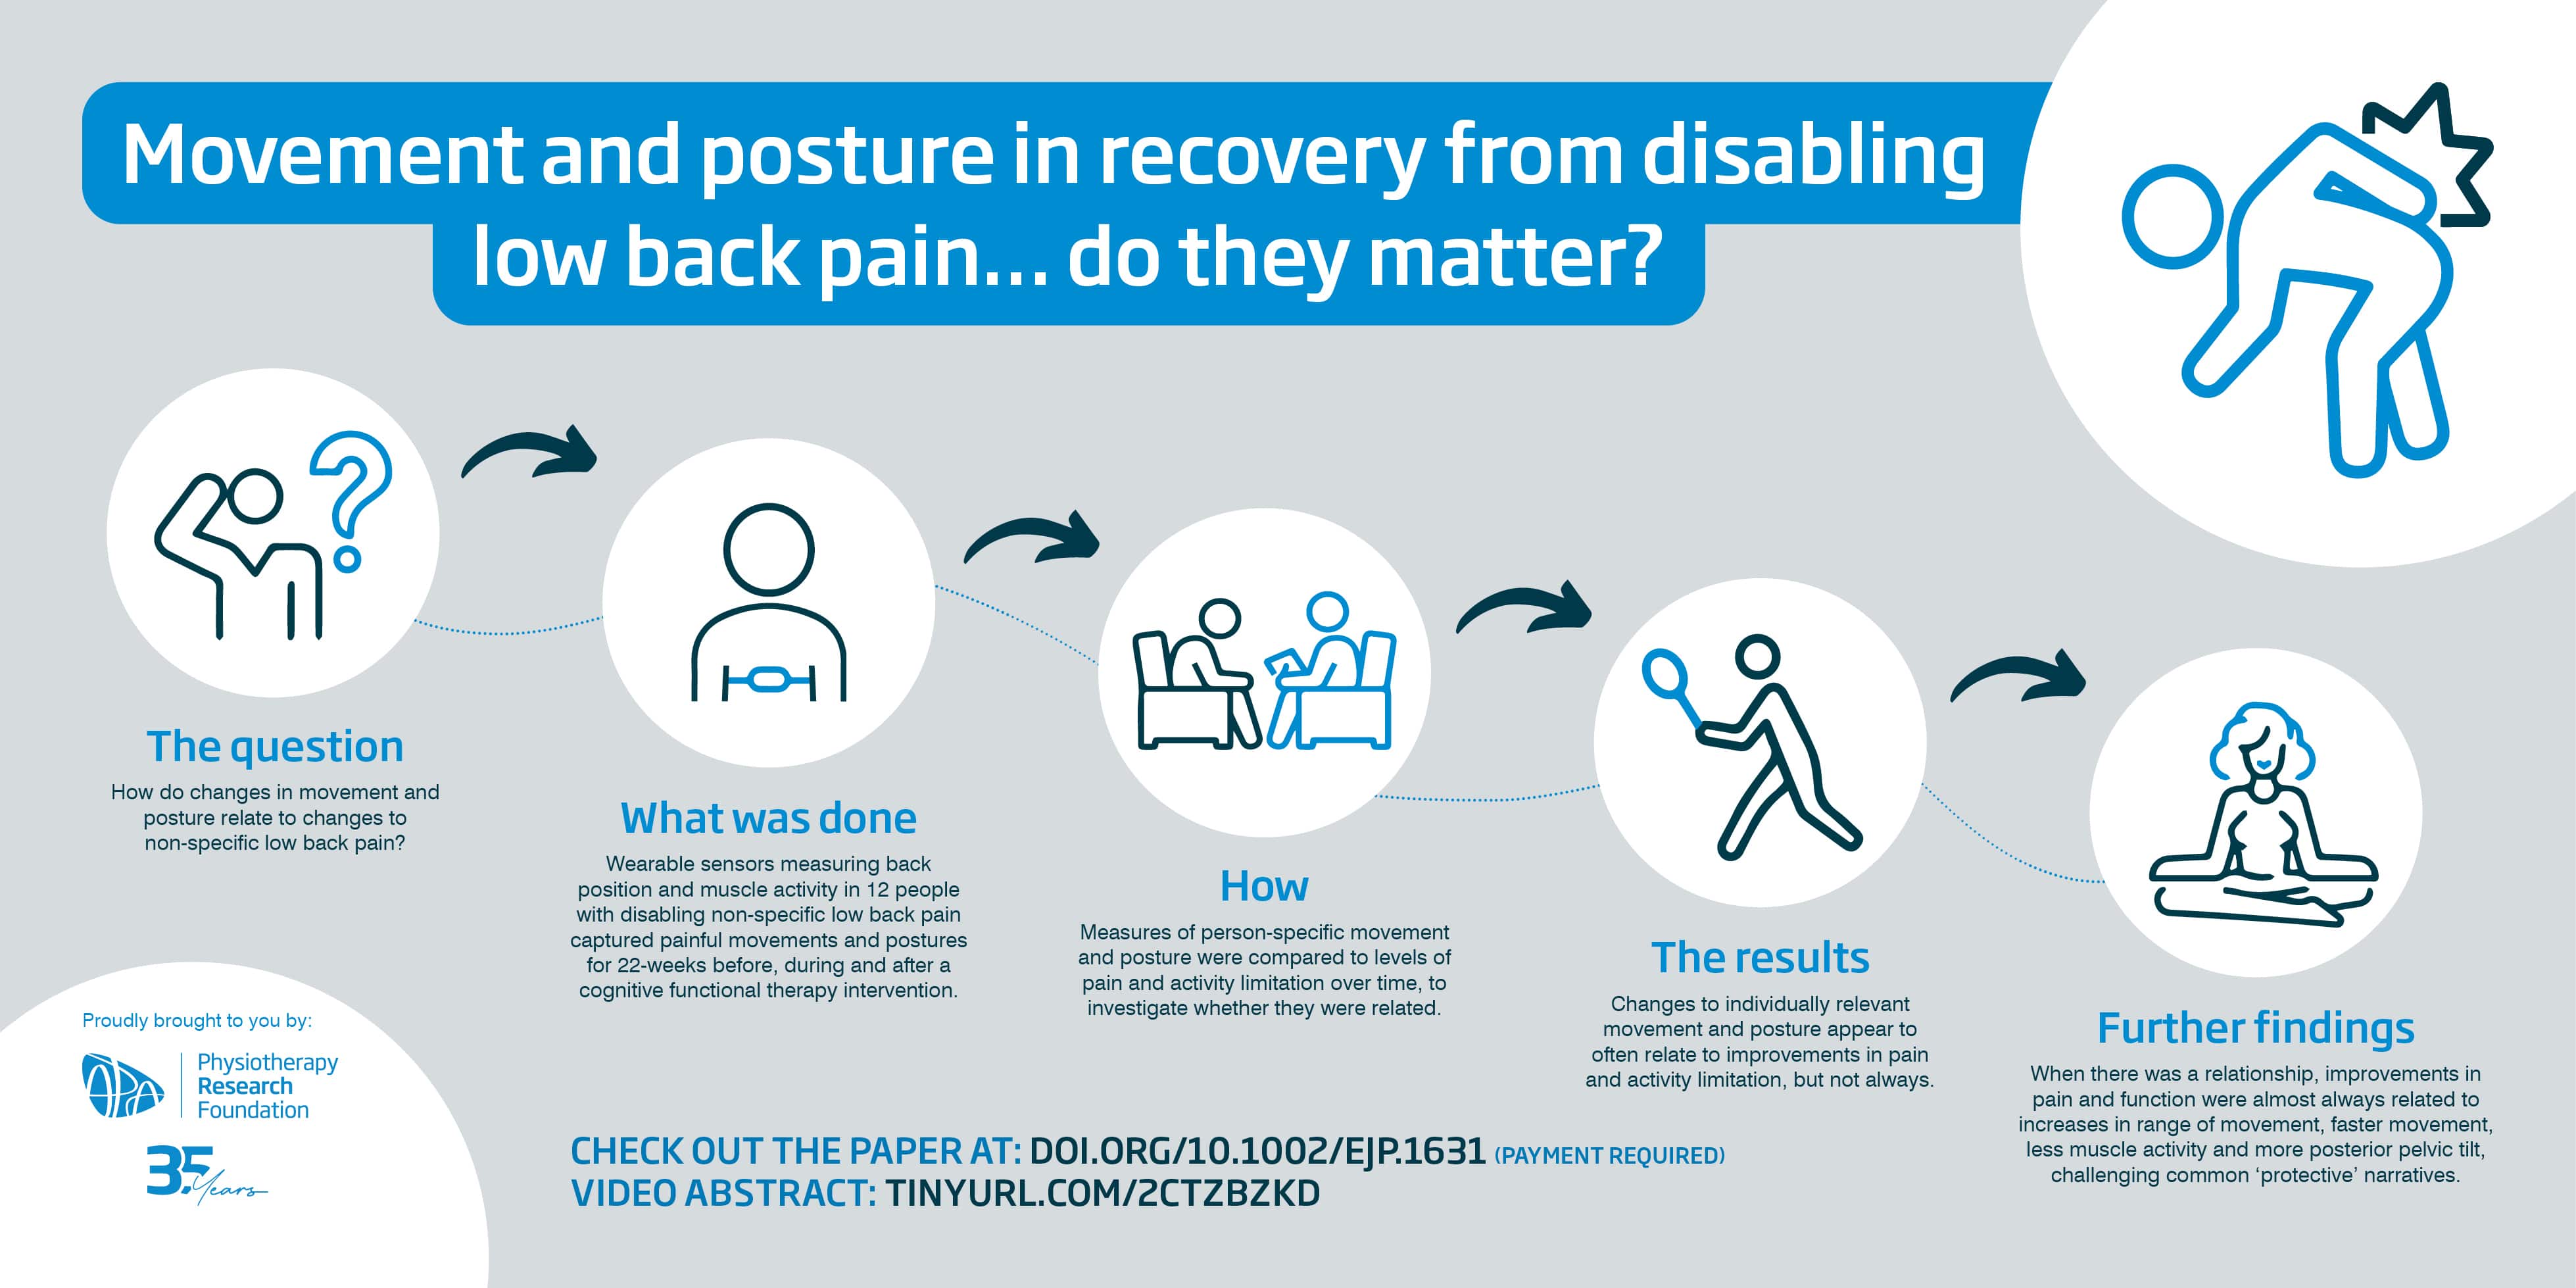 Movement and posture in recovery from disabling low back pain… do they matter?